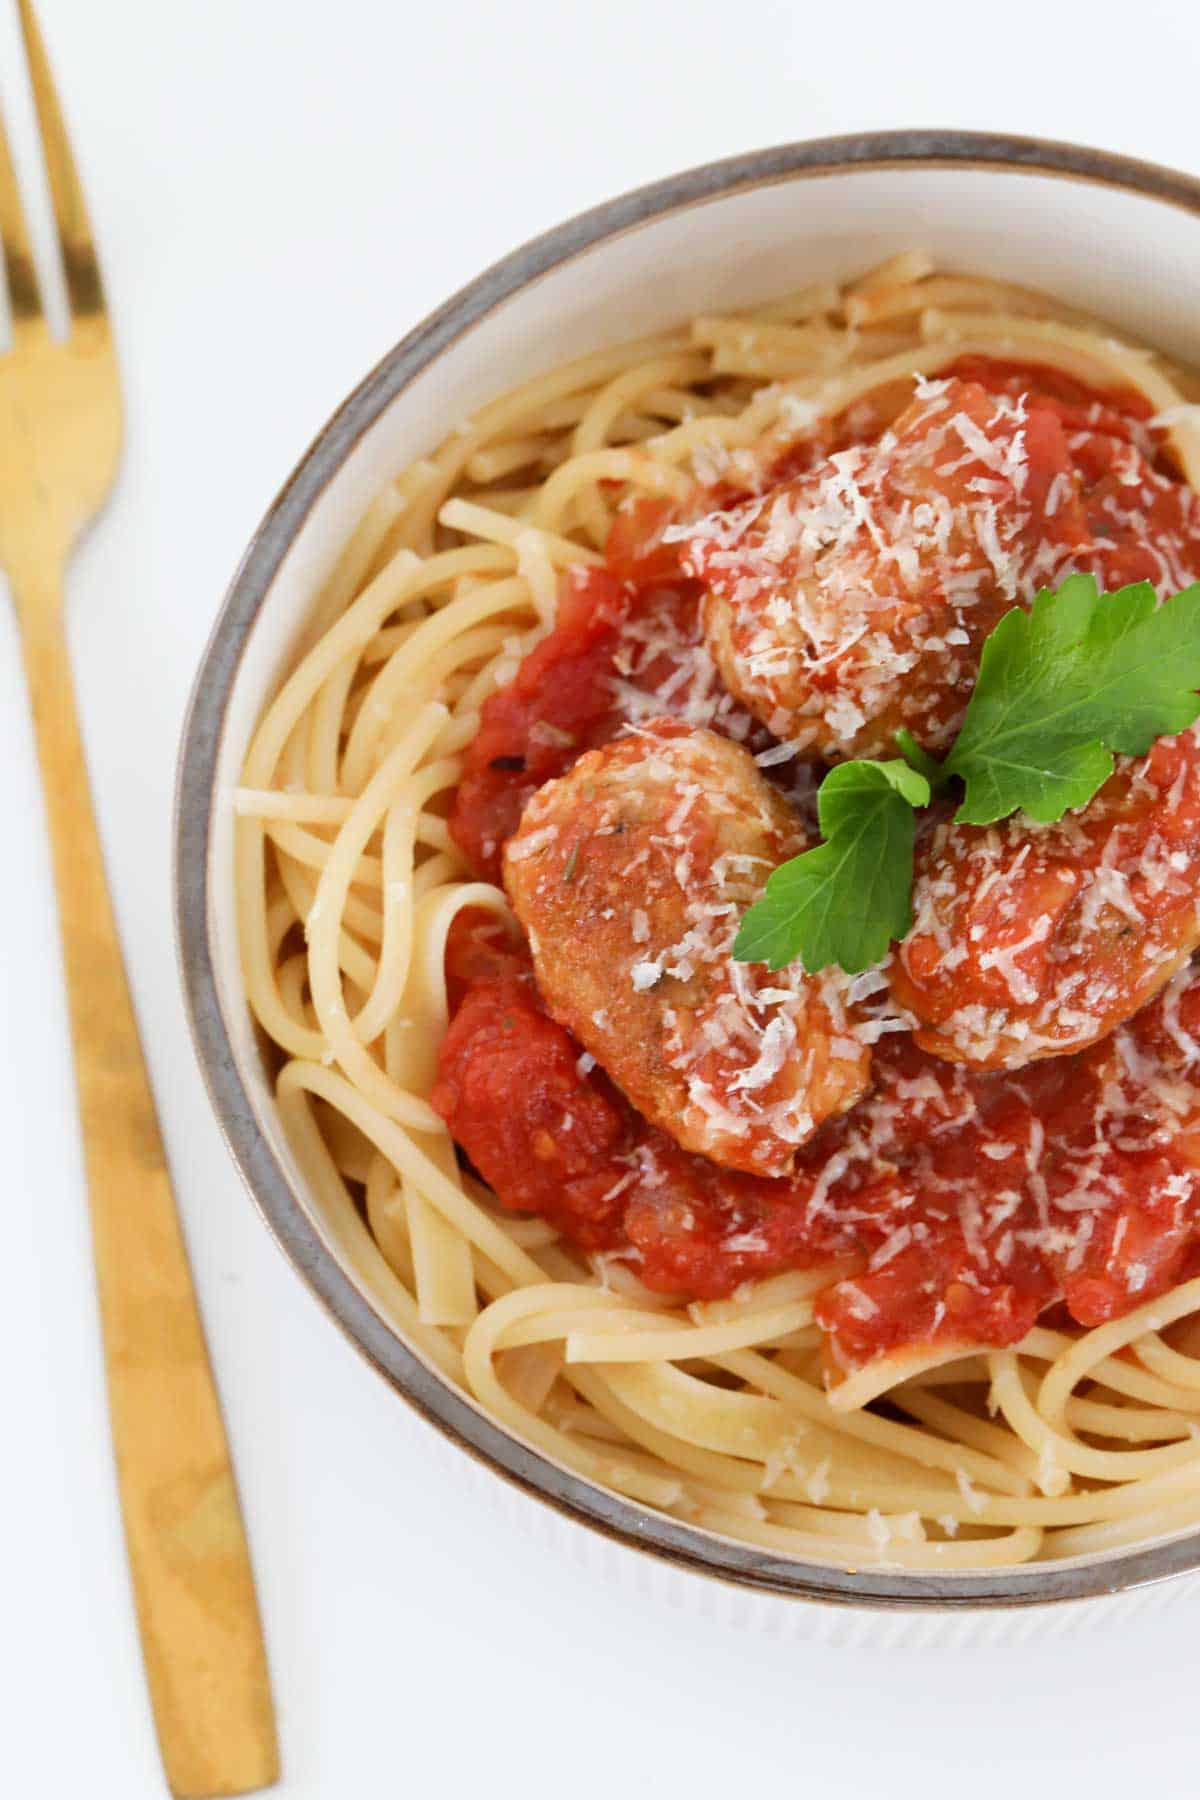 Sausage meatballs in a tomato sauce, in a bowl filled with spaghetti noodles.